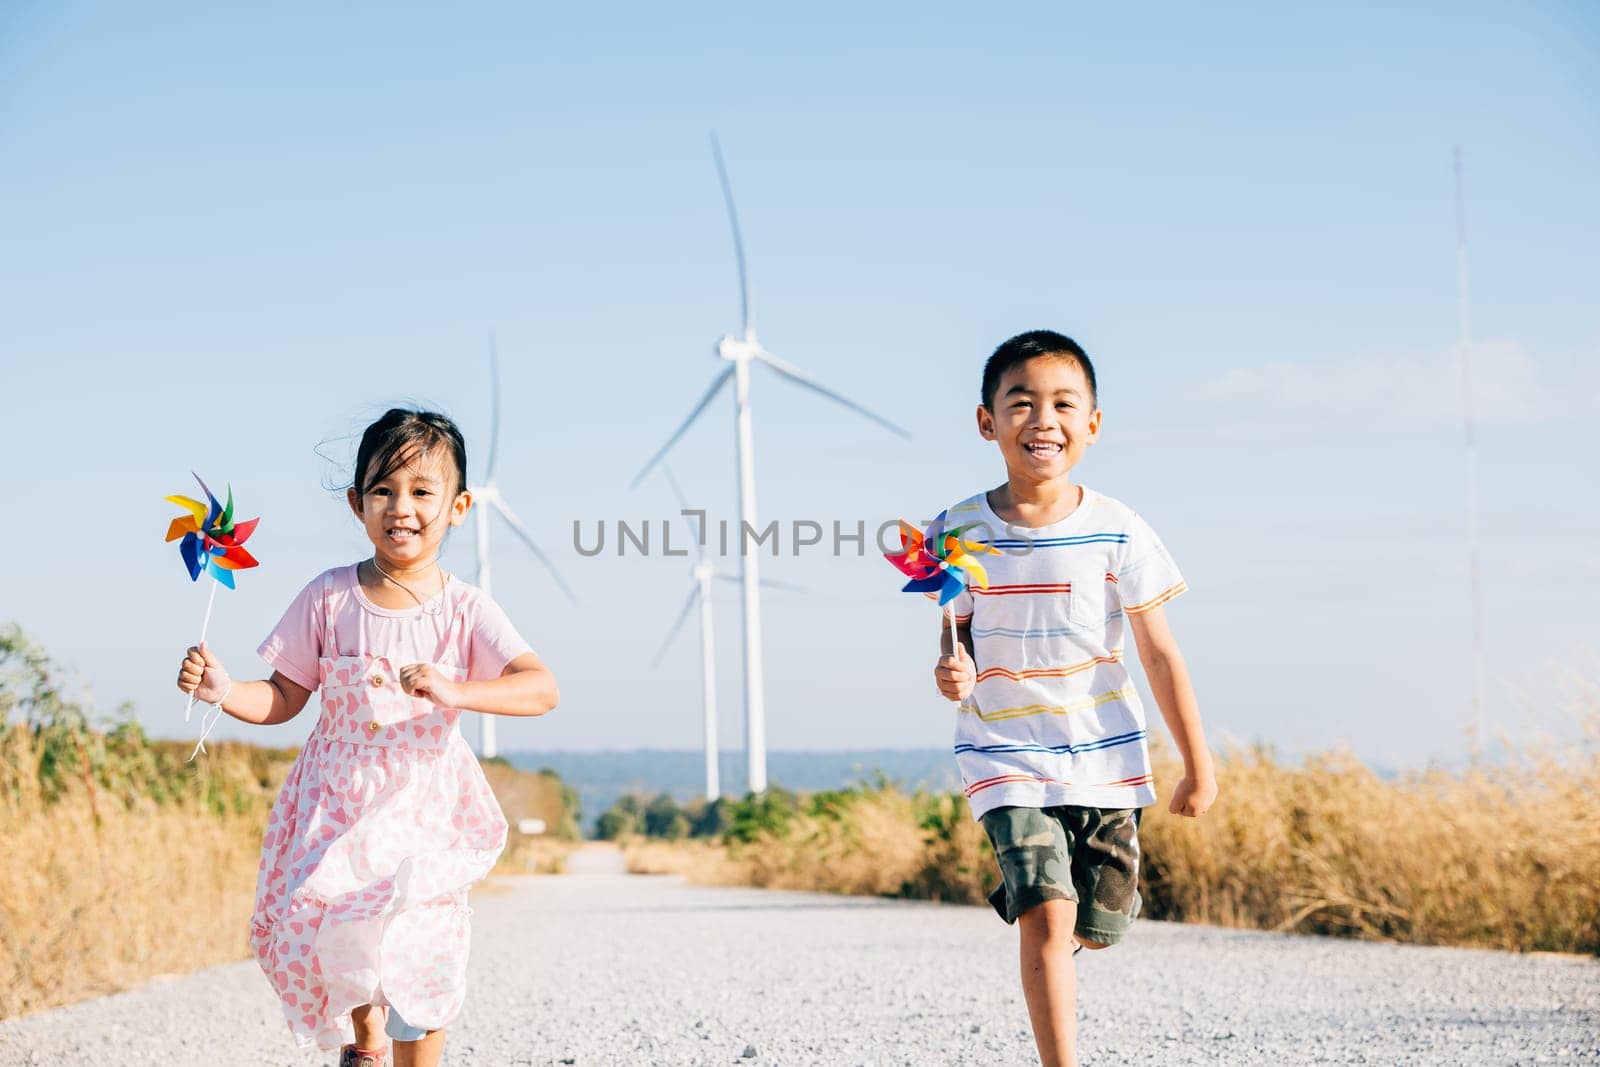 Brother and sister run by windmills holding pinwheels. Kids' joy near turbines represents a future of clean energy. Smiling children carefree and happy engage with sustainable technology.